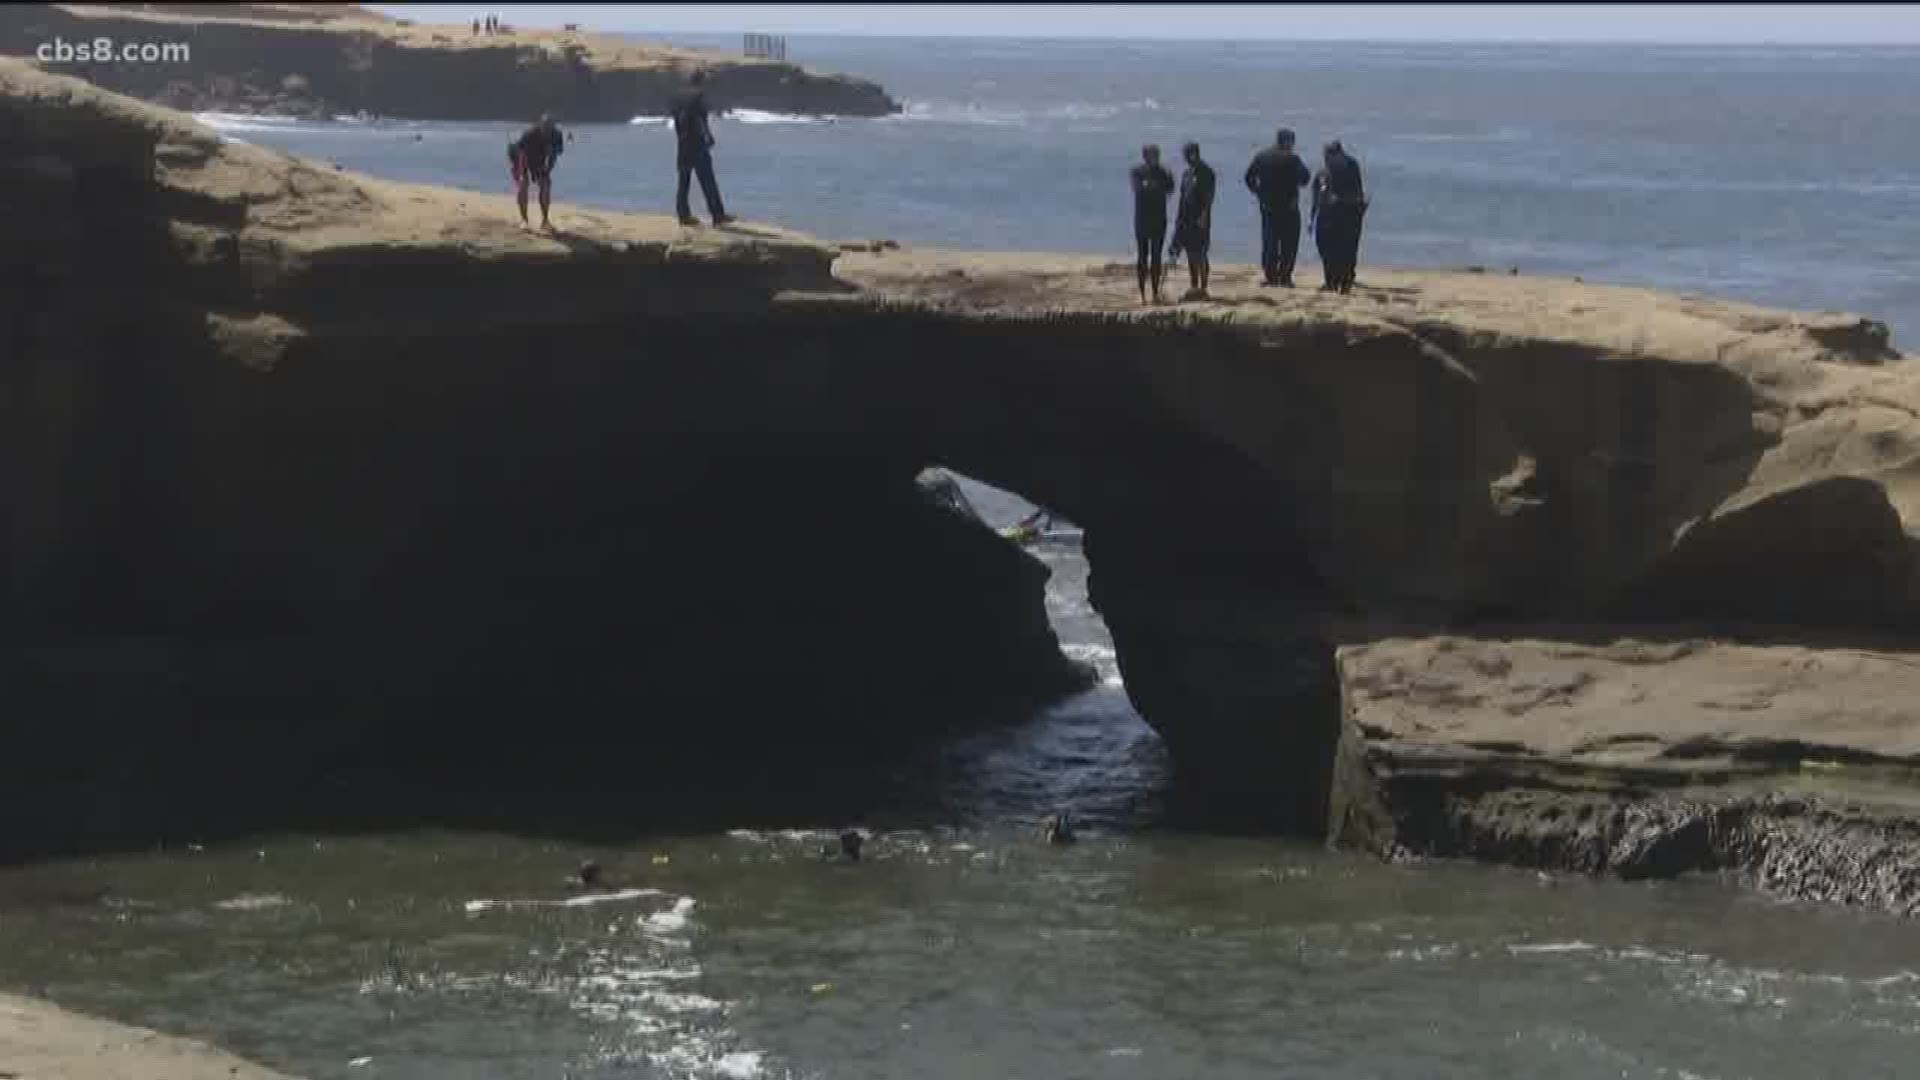 A 15-year-old boy died Wednesday after reportedly jumping into the water at Sunset Cliffs. The boy was identified Wednesday night as Anthony Womack, a tenth grader at Sweetwater High School.